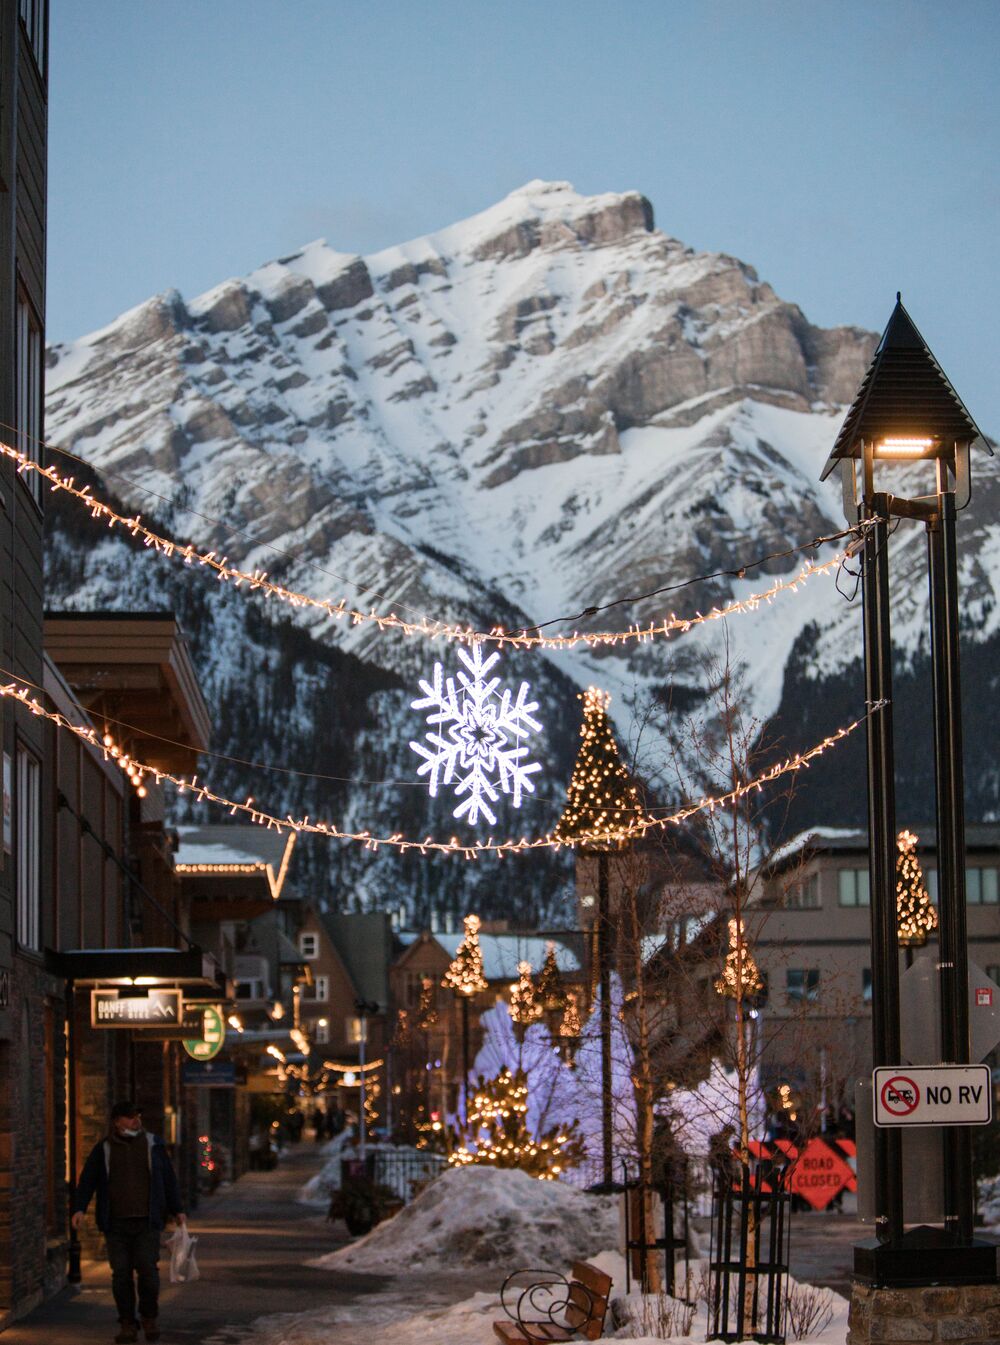 Bear Street in downtown Banff in Banff National Park during SnowDays.